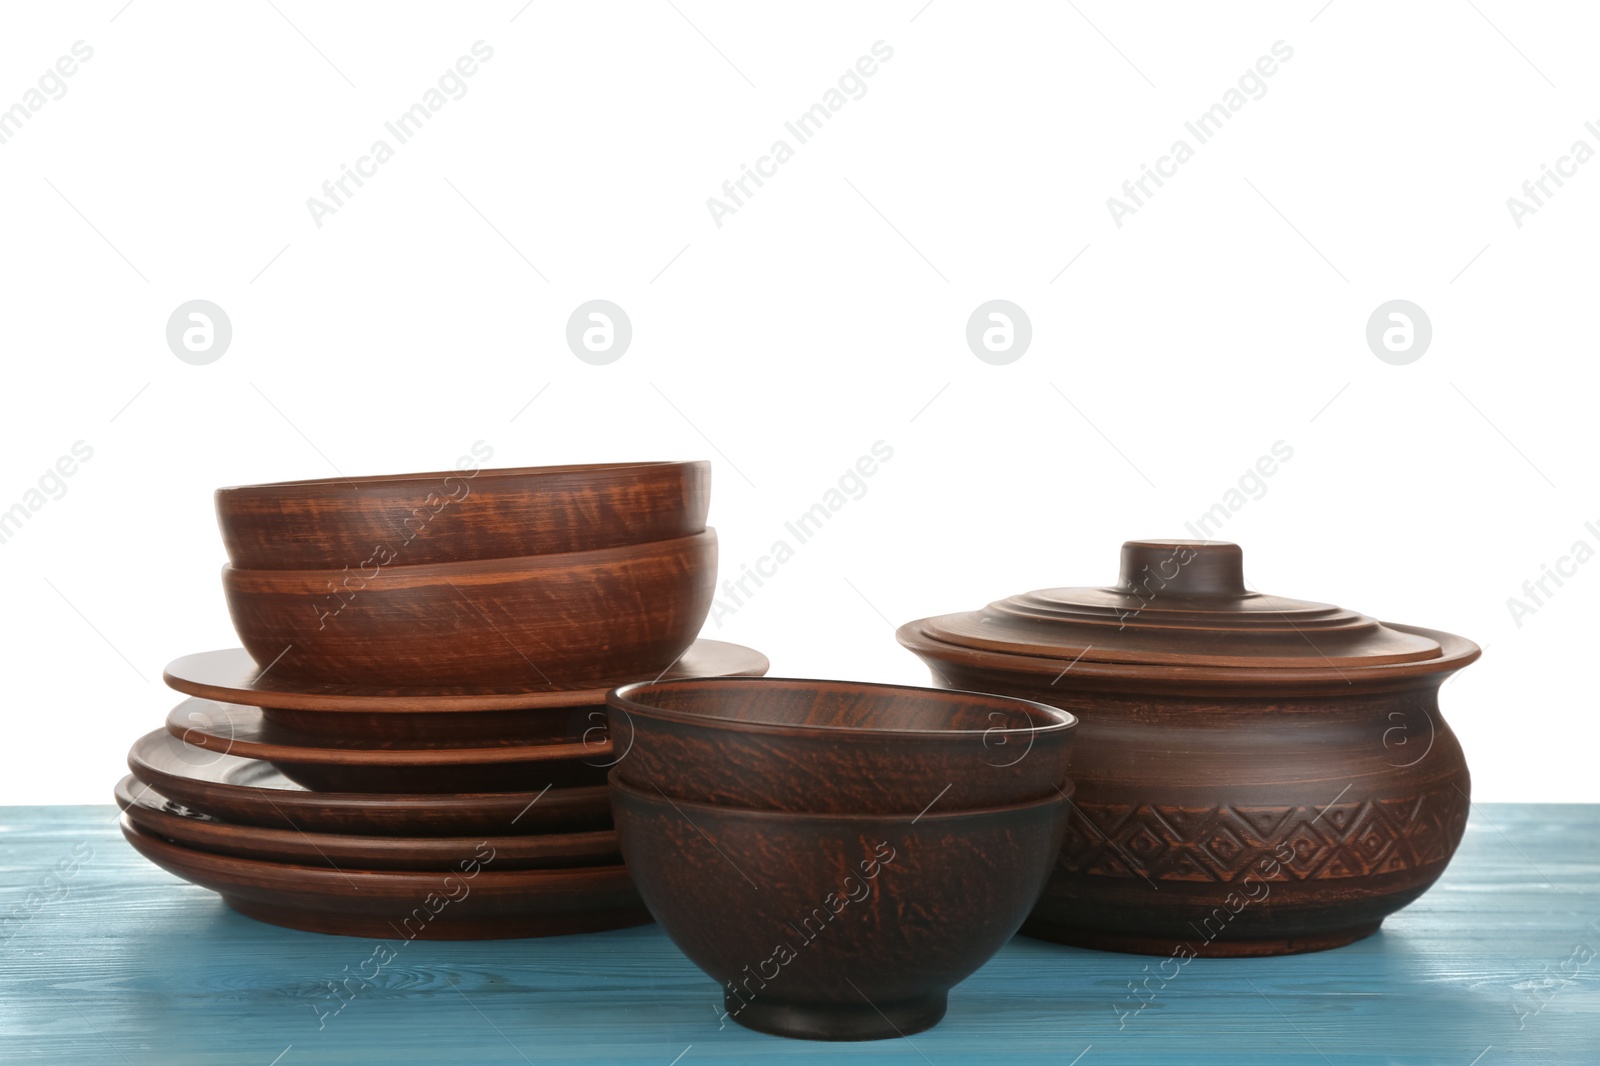 Photo of Different clay dishware on light blue wooden table against white background